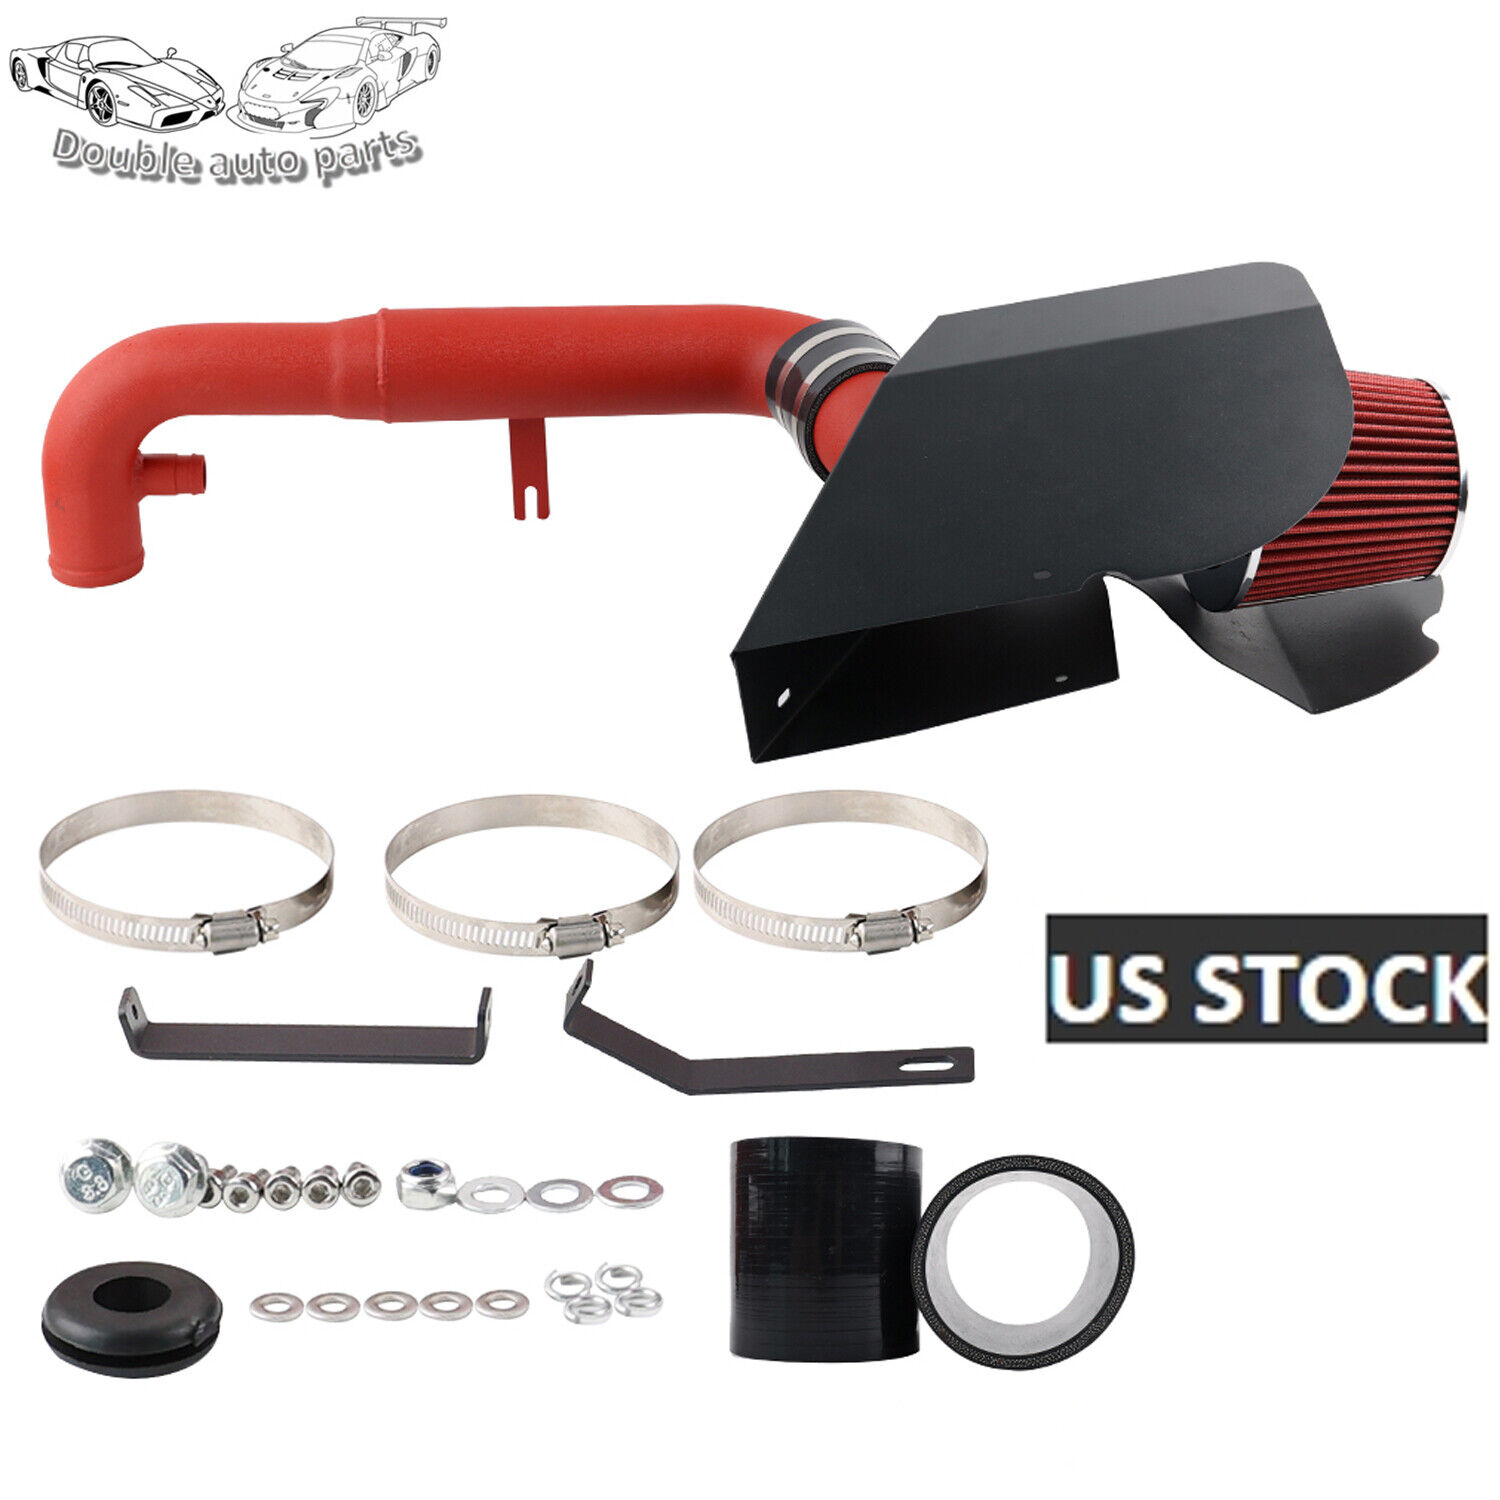 For 2011-12 Golf GTI MK6 2.0 Audi A3 EA113 Red Cold Air Intake System Filter Kit